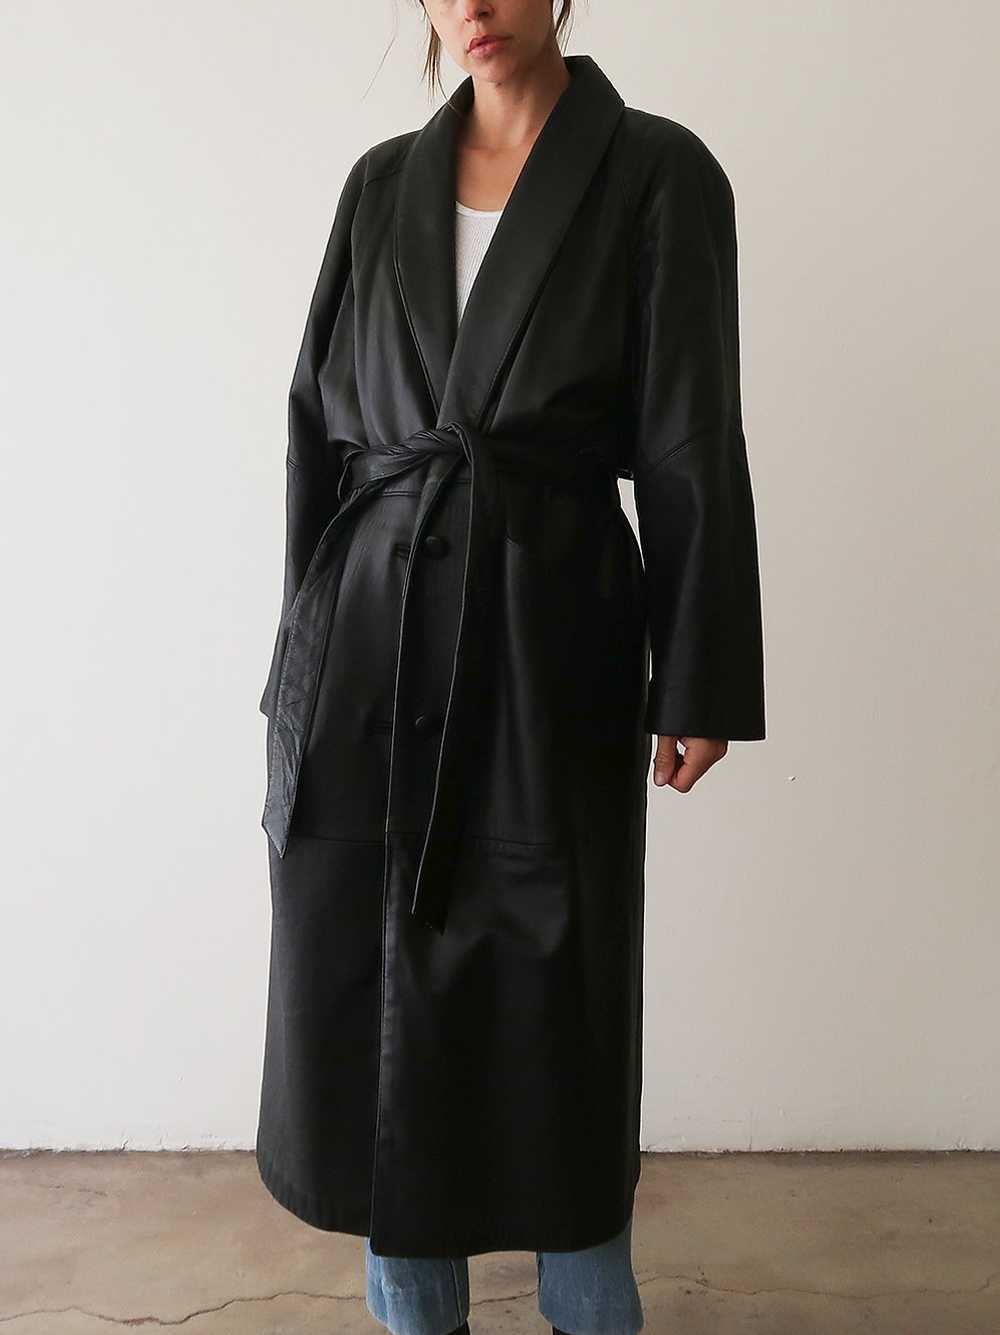 Black Leather Duster - image 2